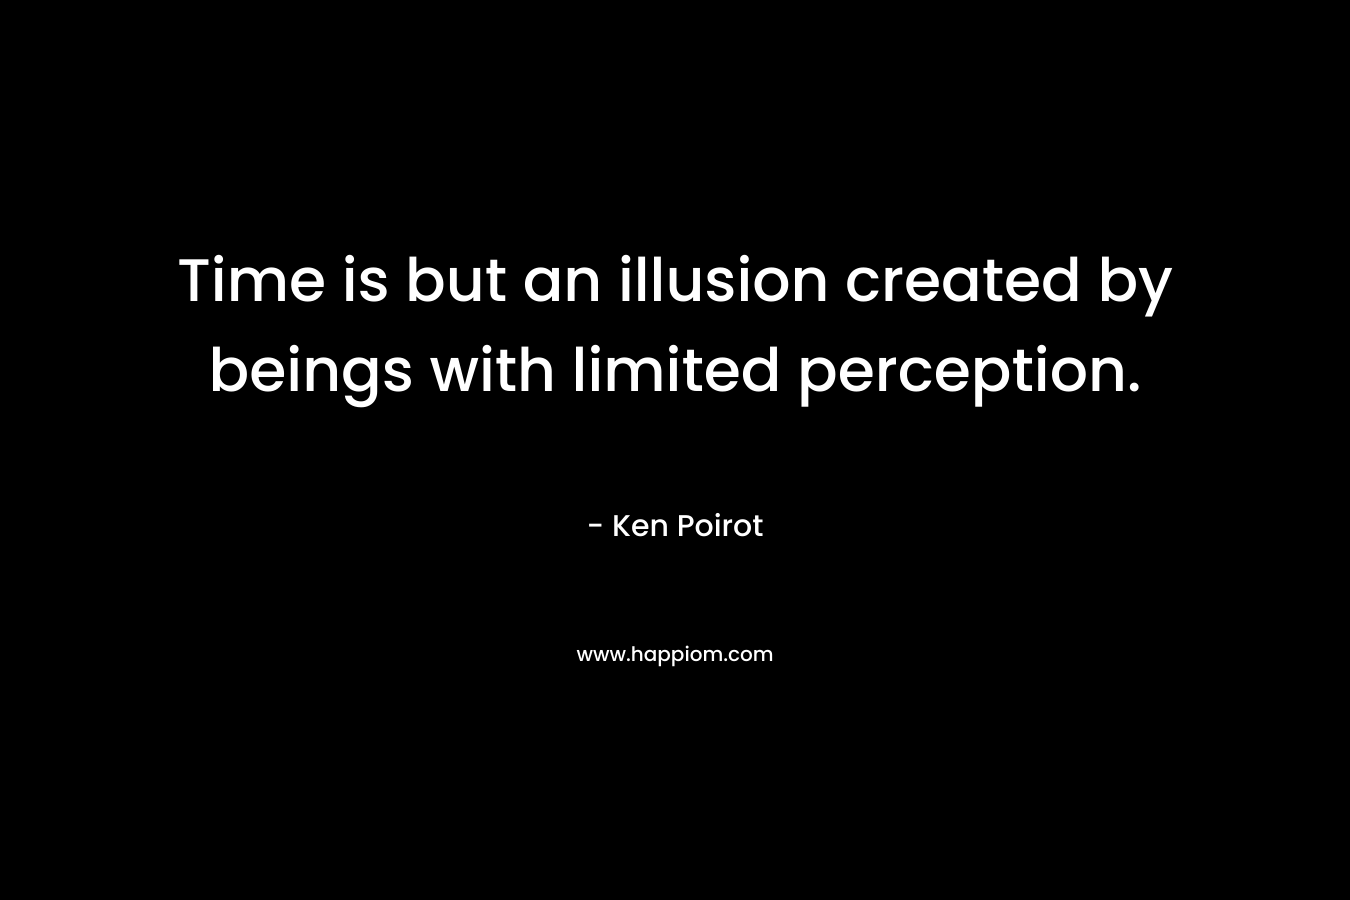 Time is but an illusion created by beings with limited perception.